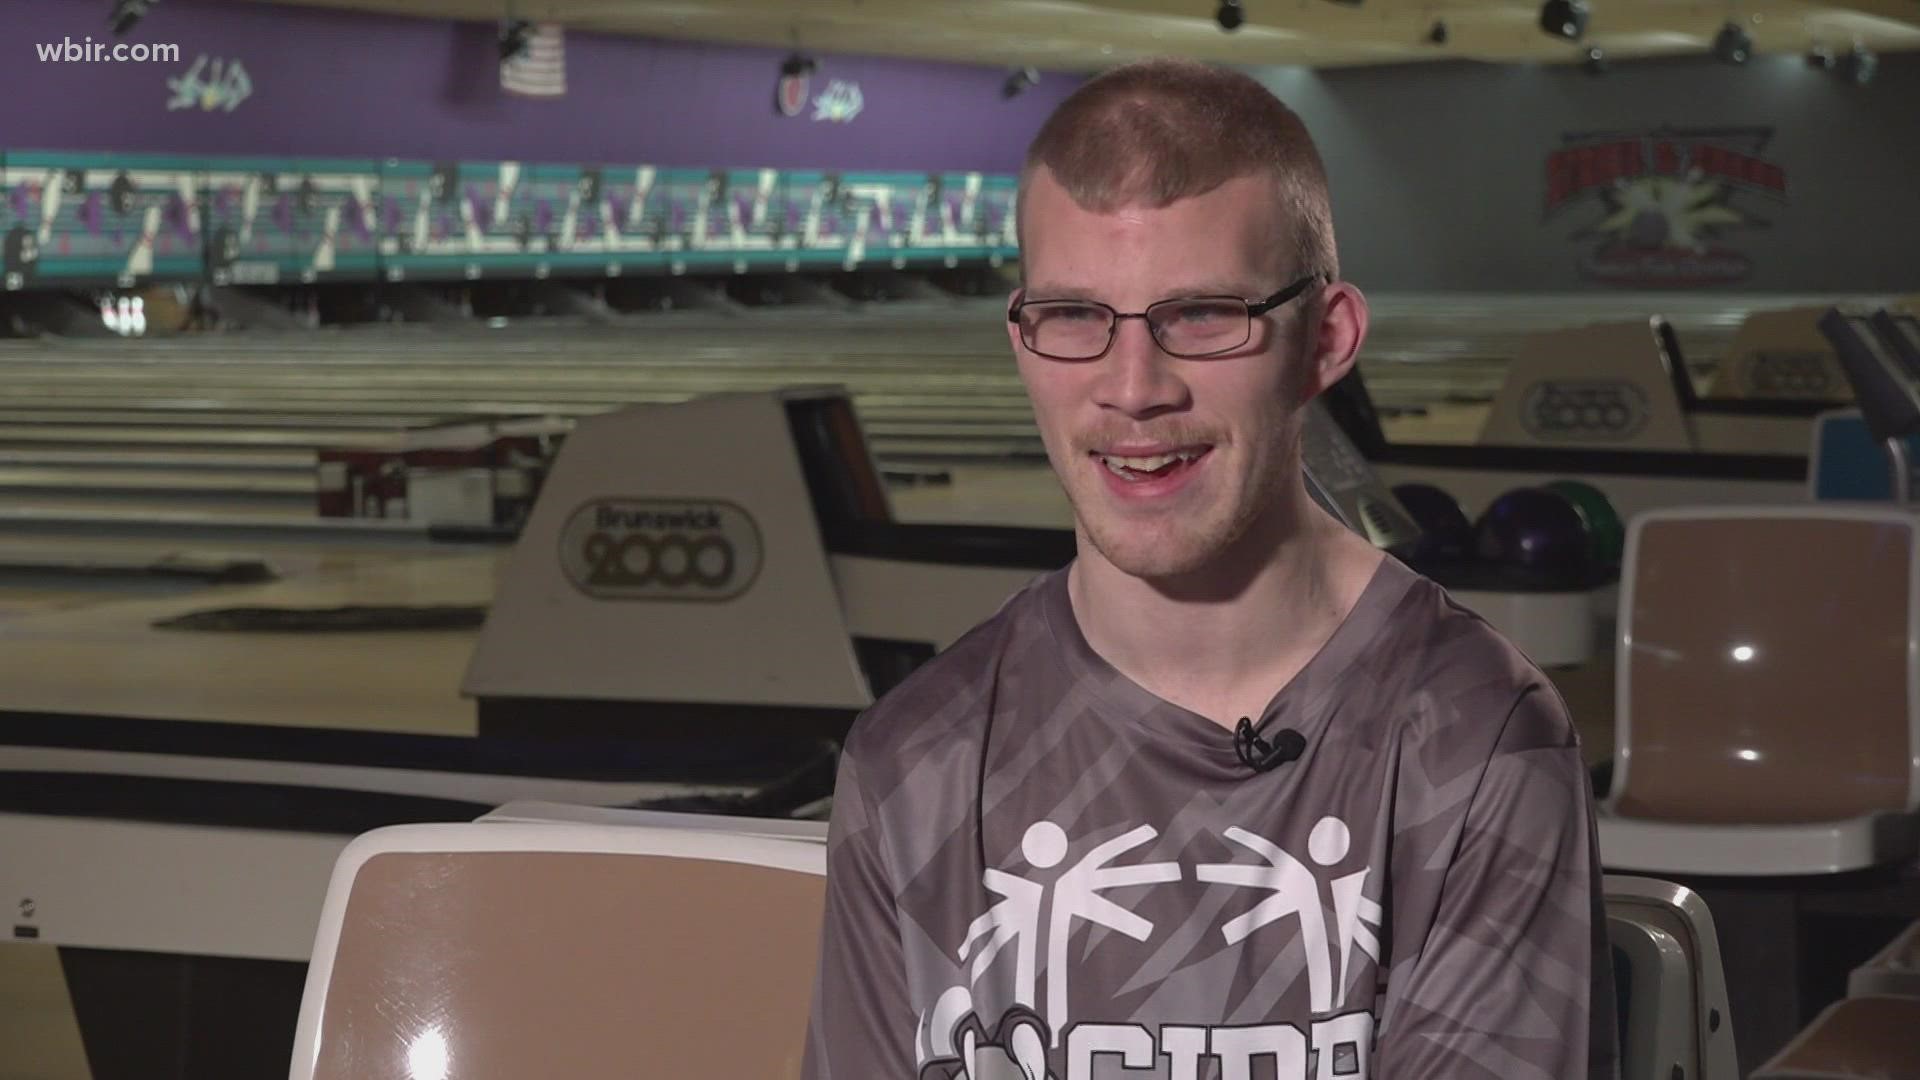 Wyatt Branson will compete in bowling in the Special Olympics USA Games in June.